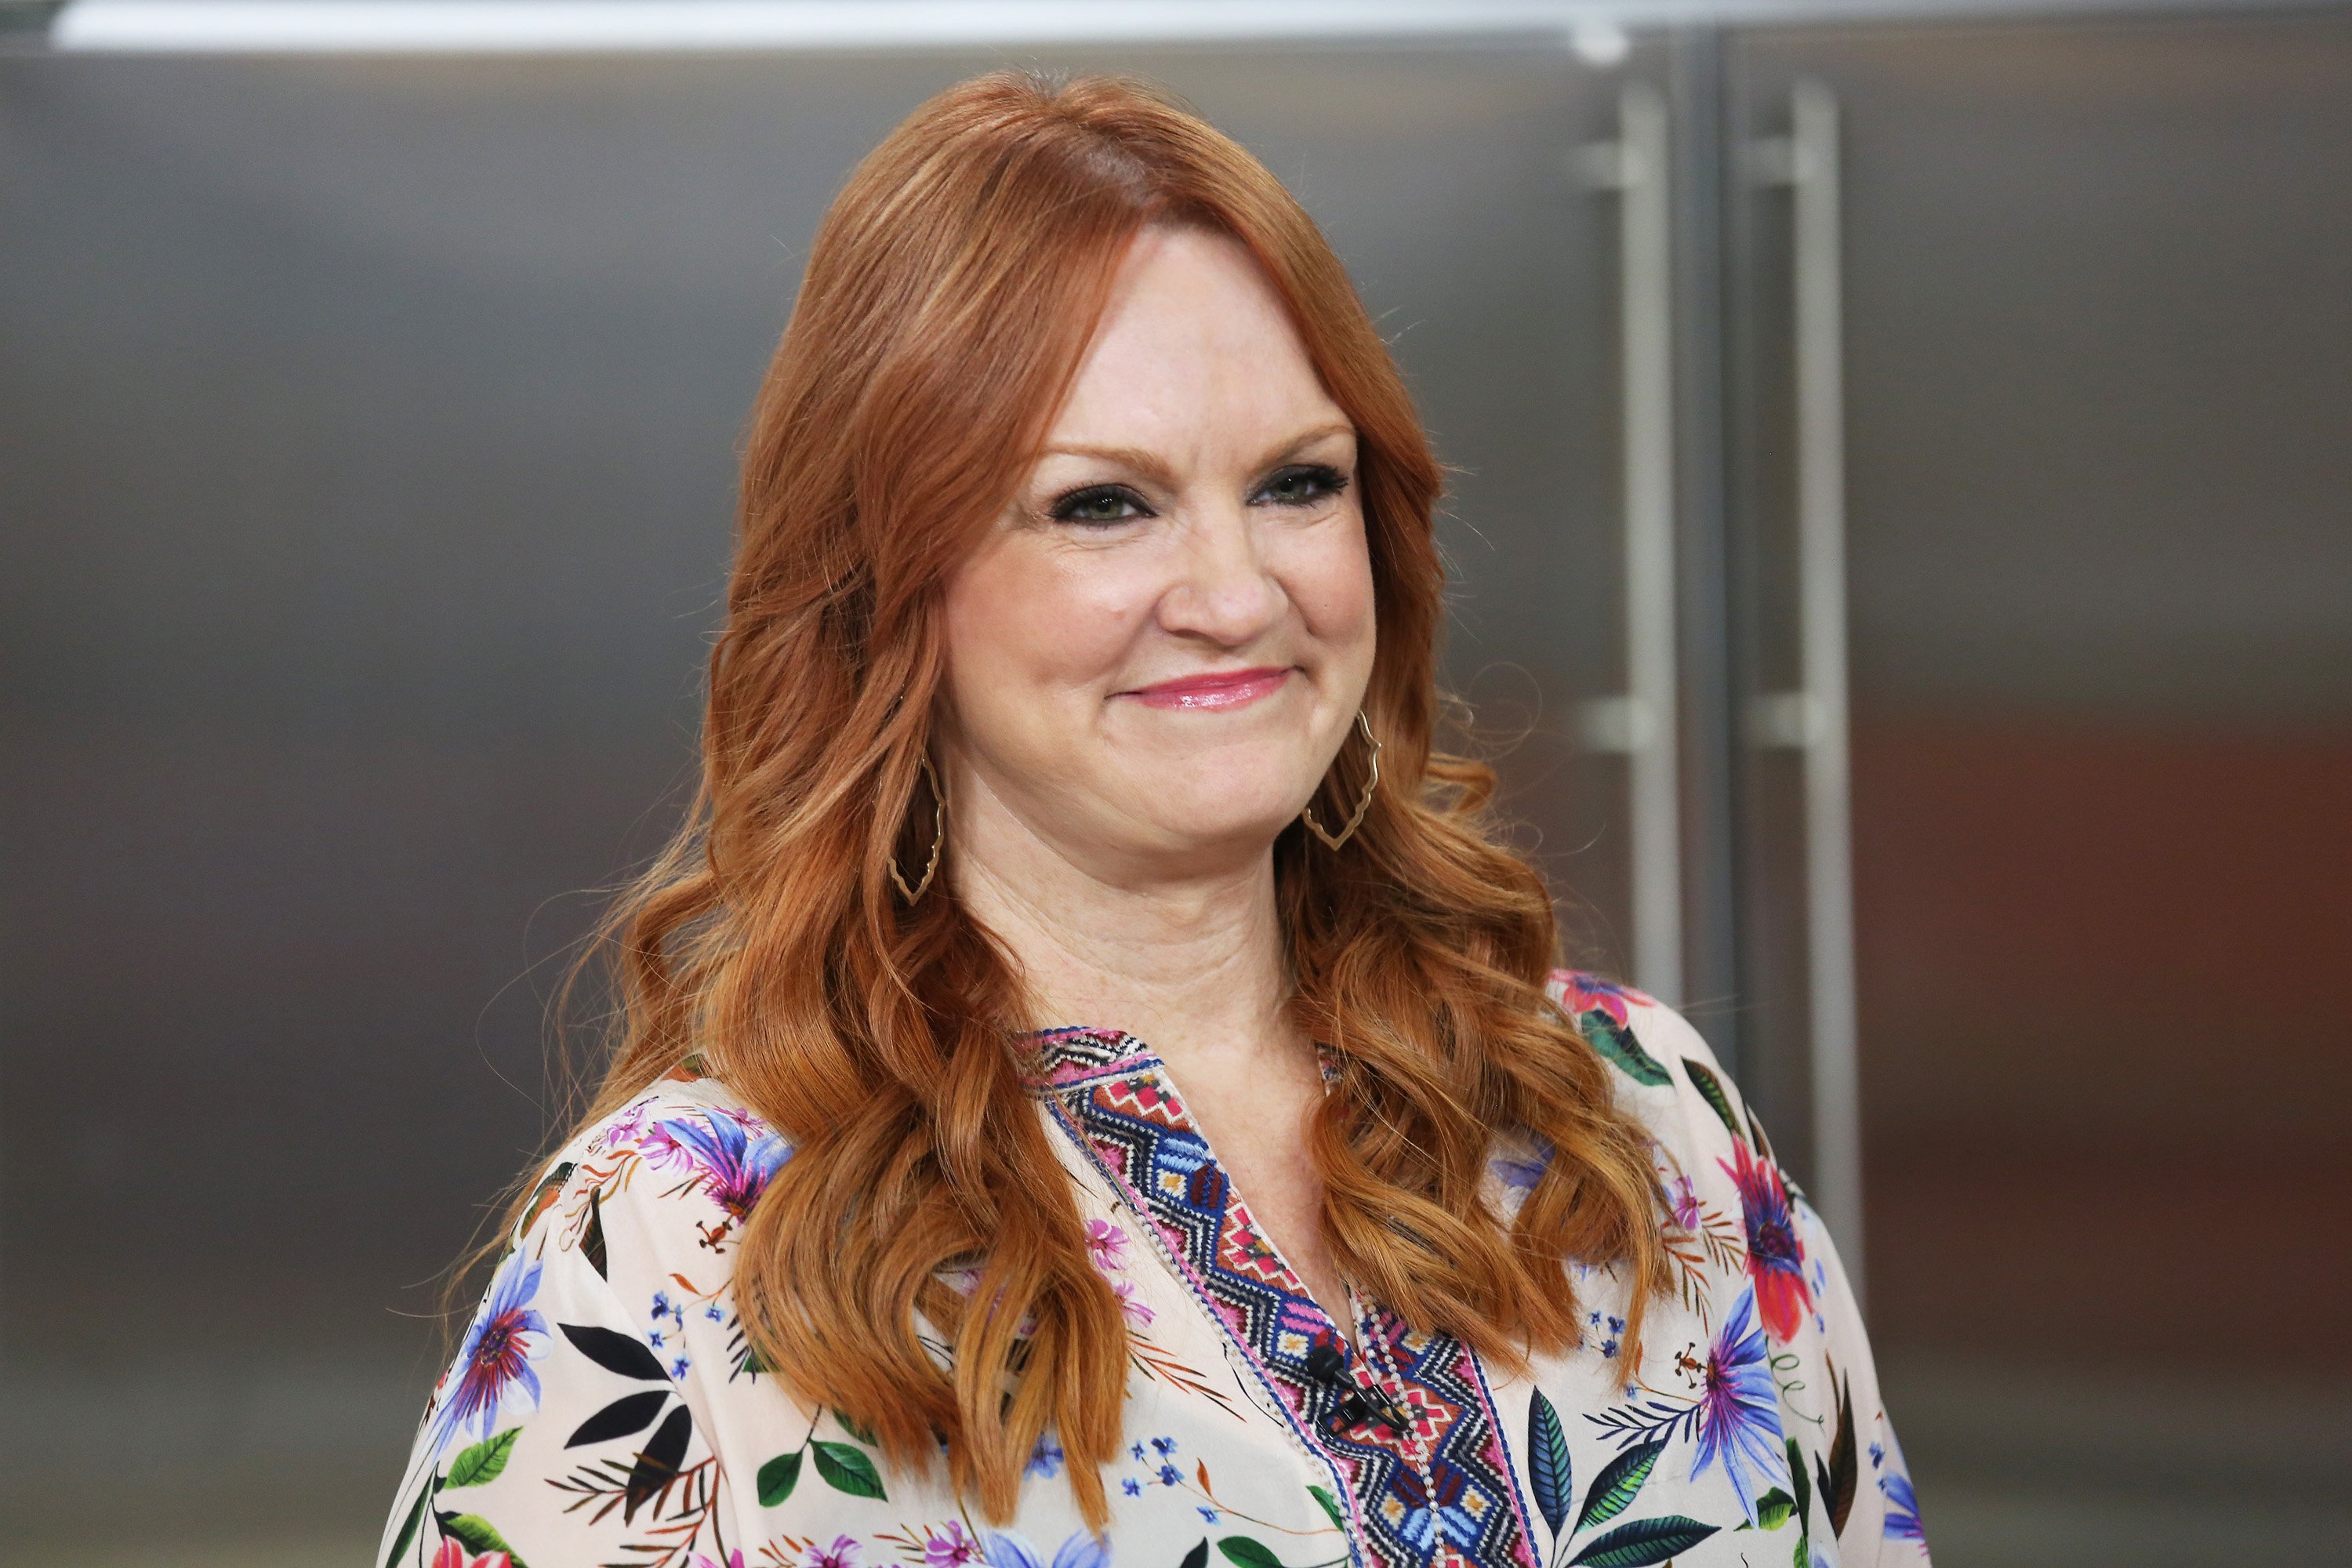 Ree Drummond wears a blouse with flower patterns